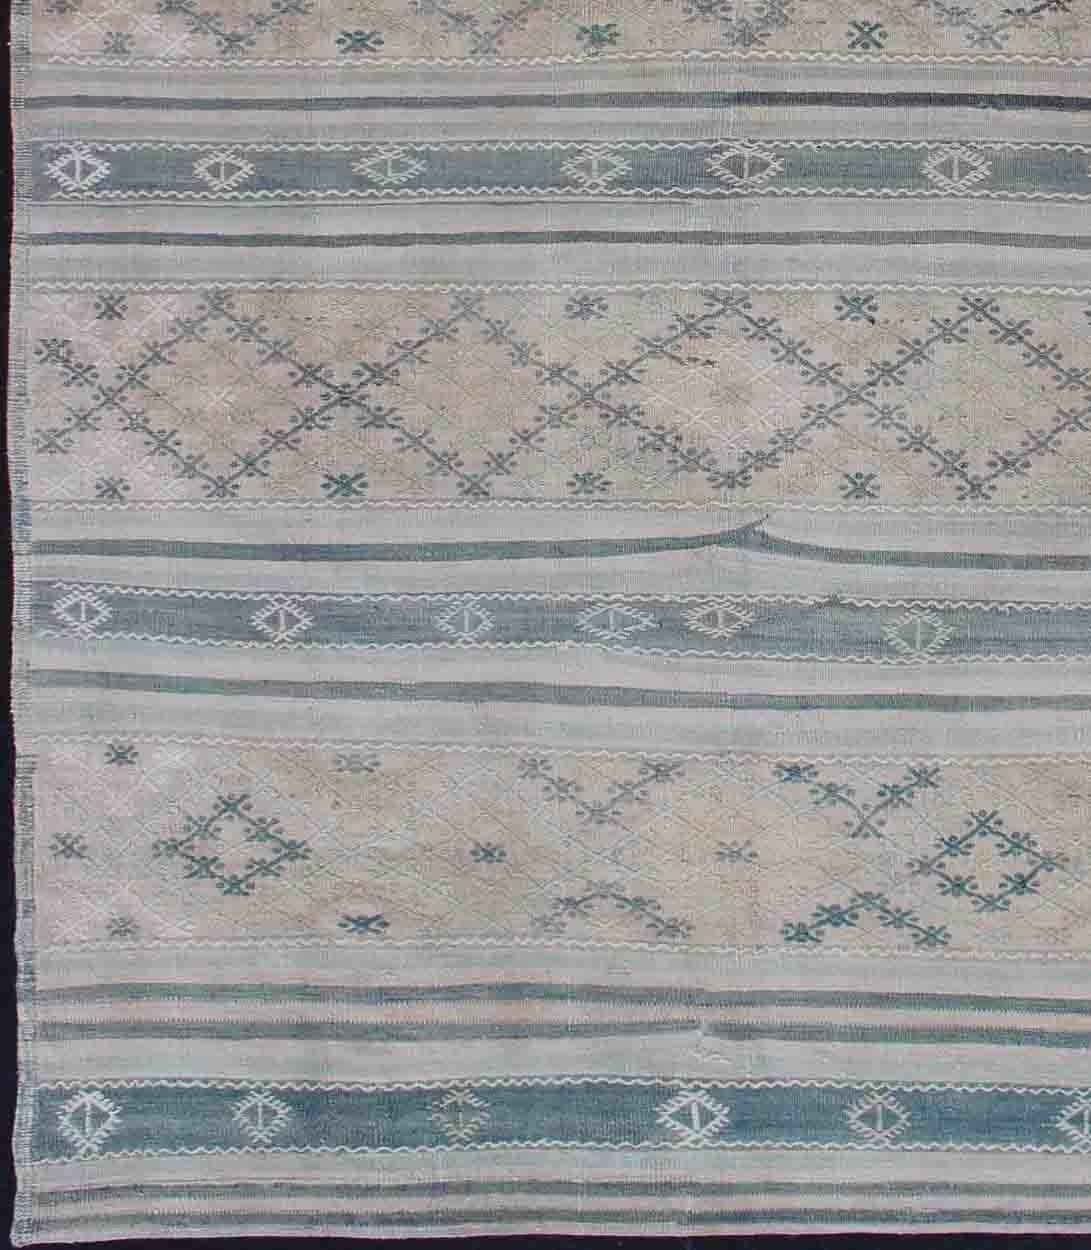 Stripe design Kilim runner with geometric motifs, rug en-176547, country of origin / type: Turkey / Kilim, circa 1950

This flat-woven Kilim runner from Turkey features an exciting composition consisting of stripes rendered in natural tones. The